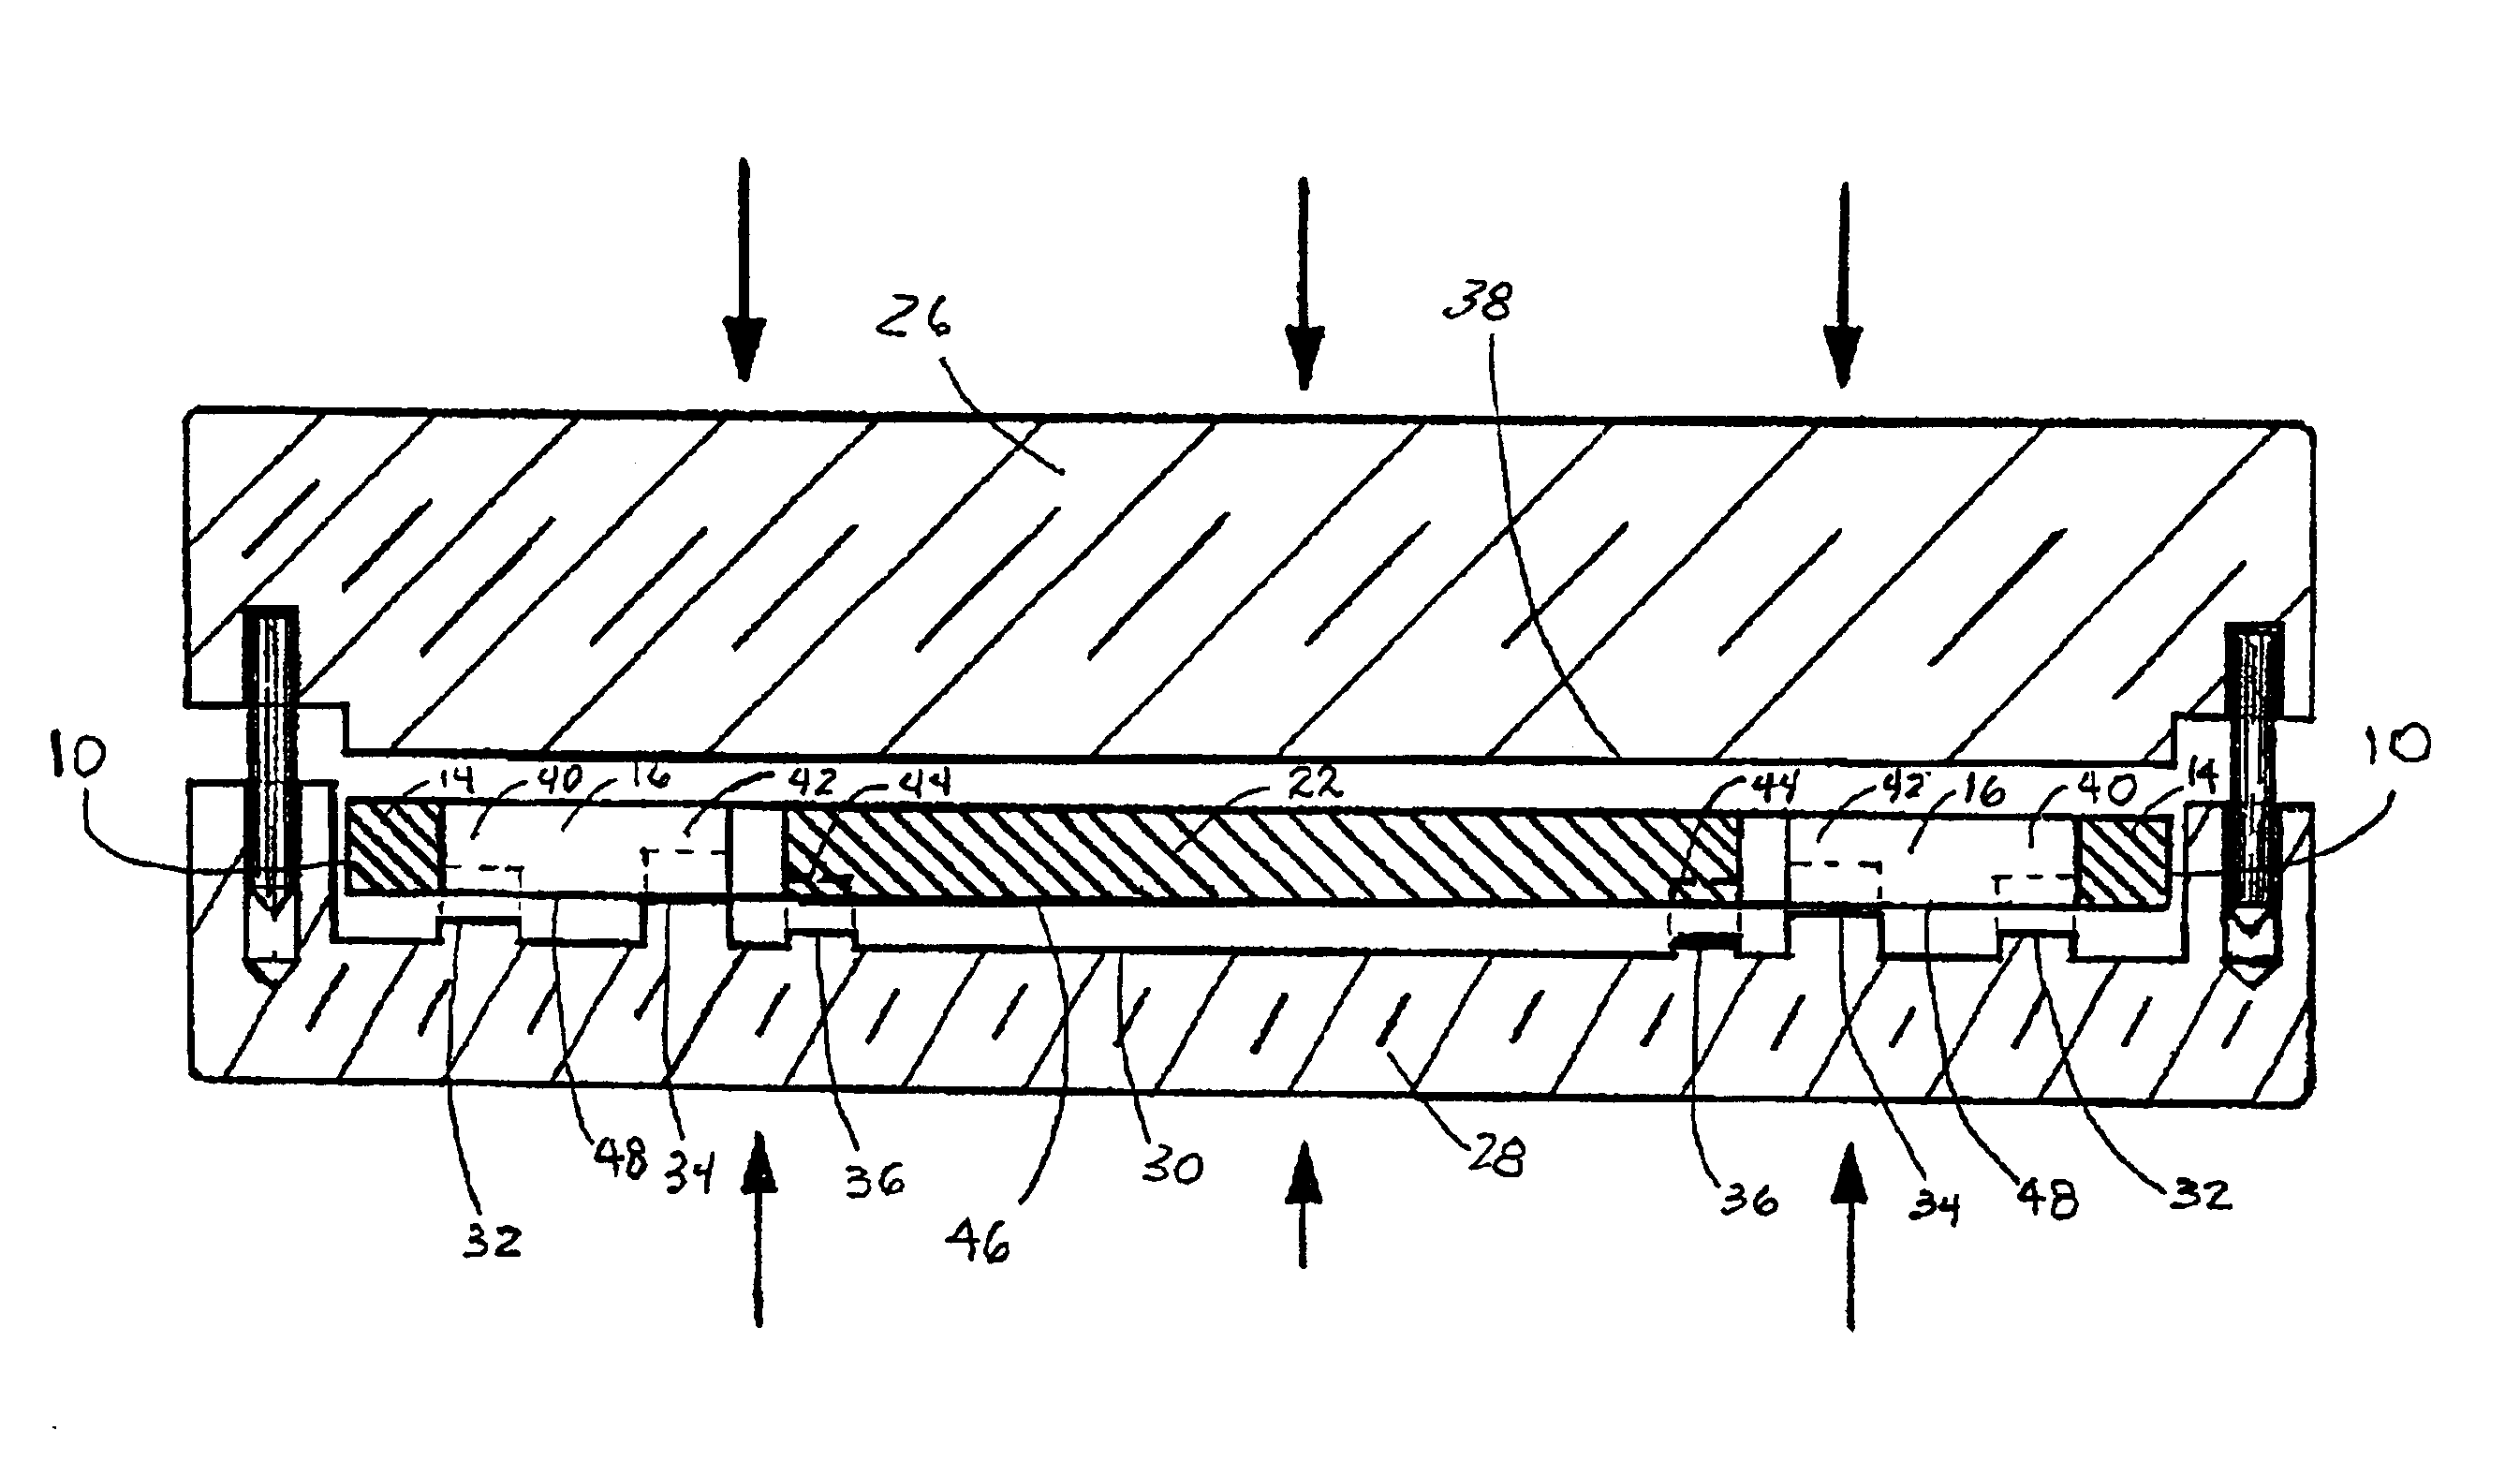 Semiconductor package with exposed die pad and body-locking leadframe